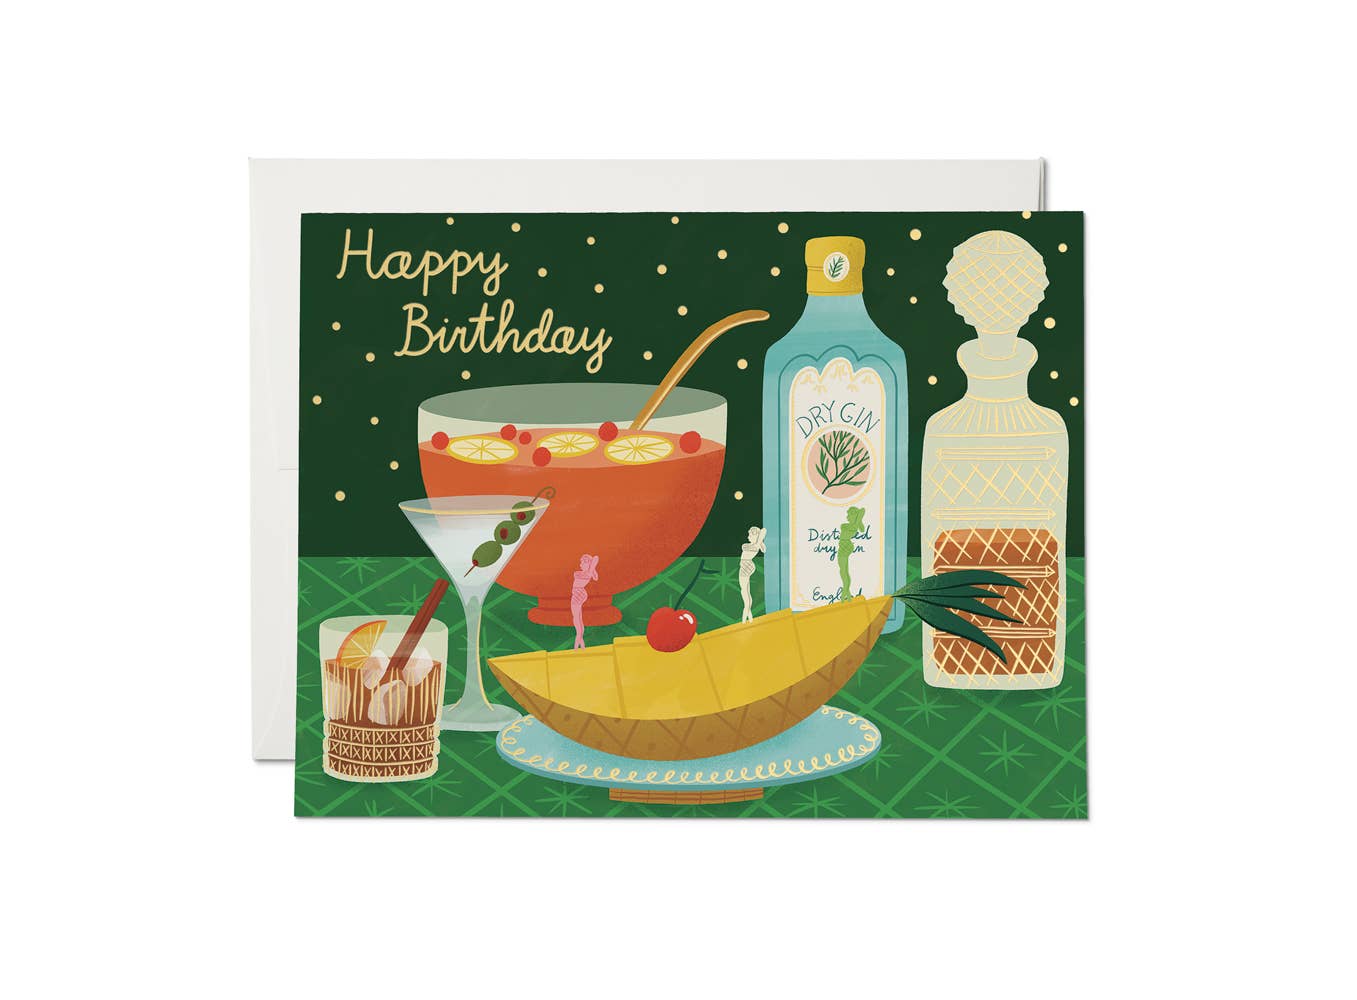 Birthday greeting card that reads "Happy Birthday" and has various boozy drinks. 